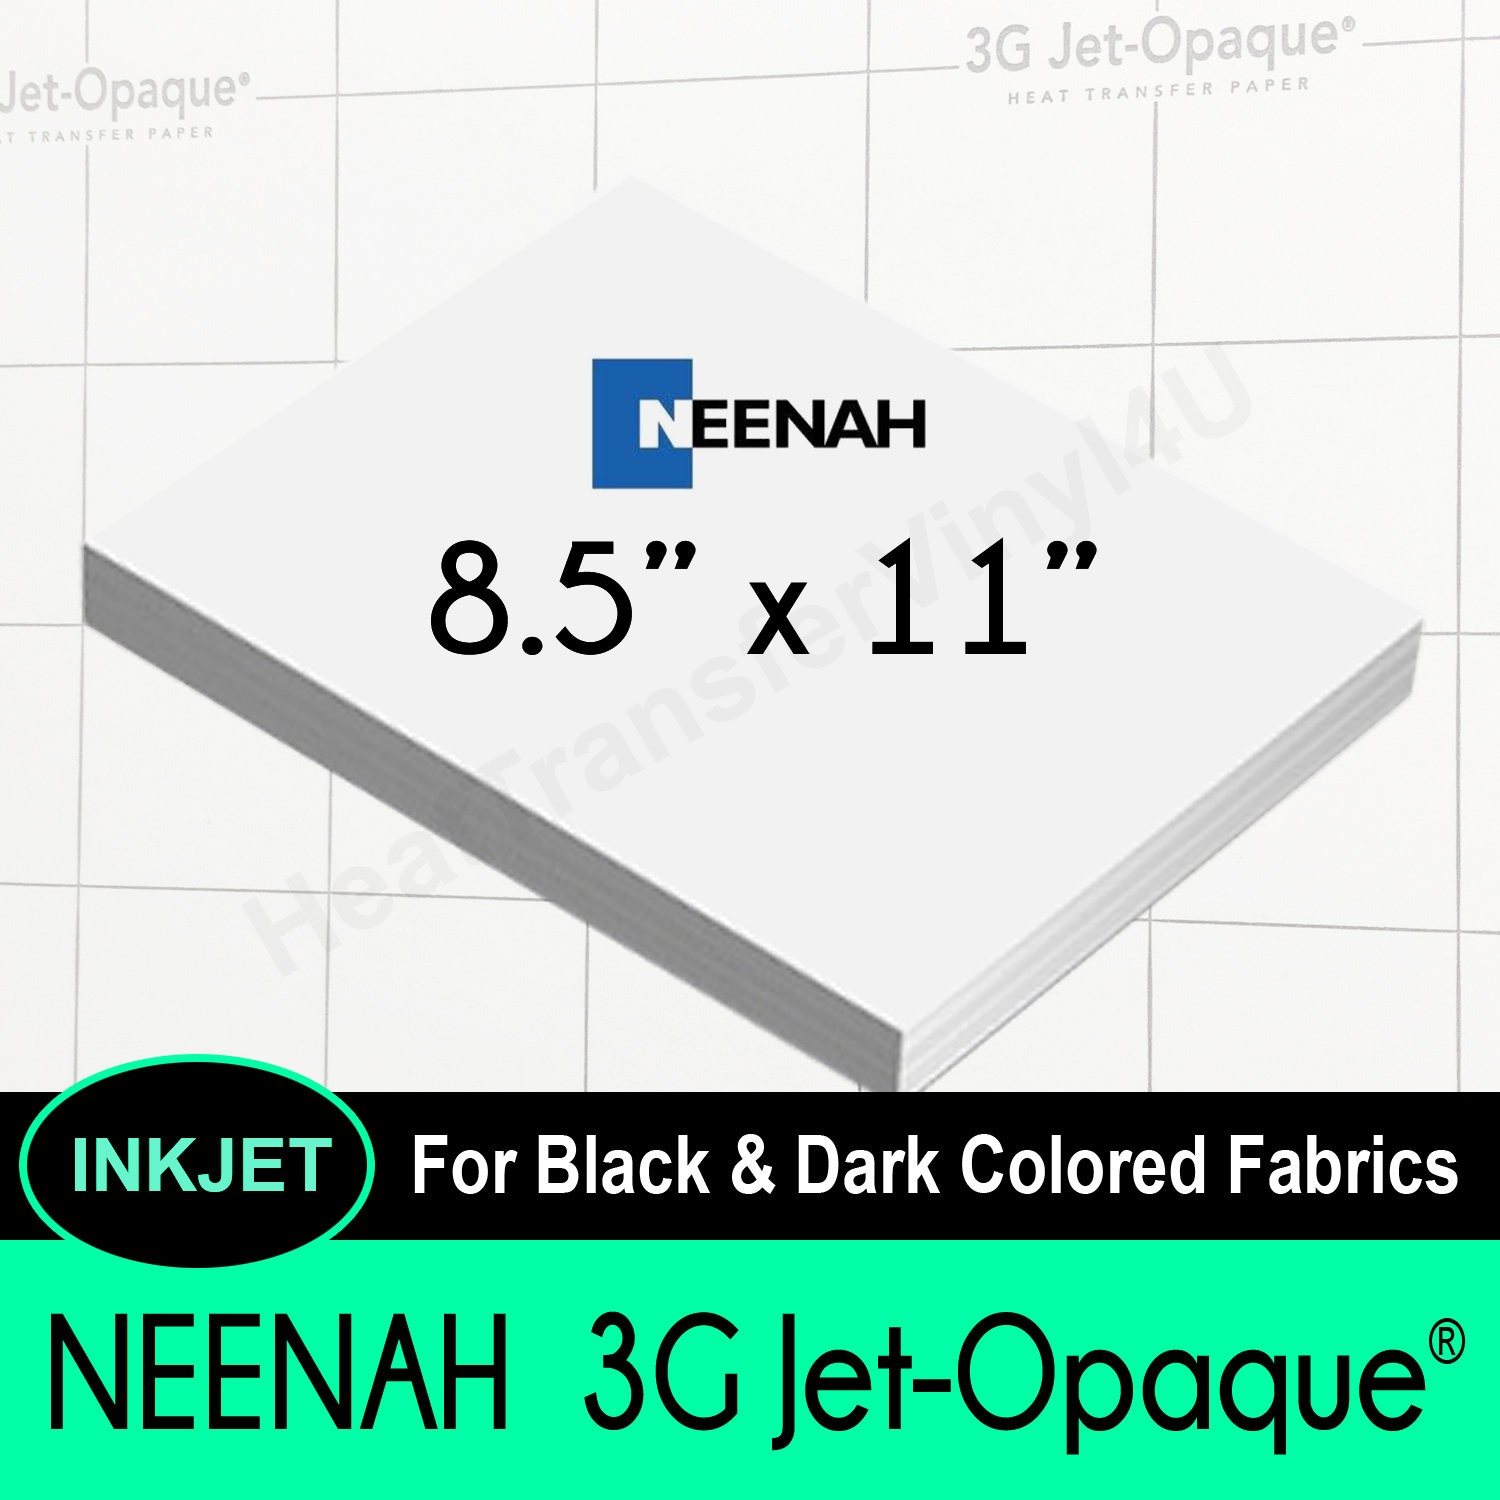 20 sheets Neenah 3G Jet Opaque Heat Transfer Paper for Dark Colors 8.5x11 